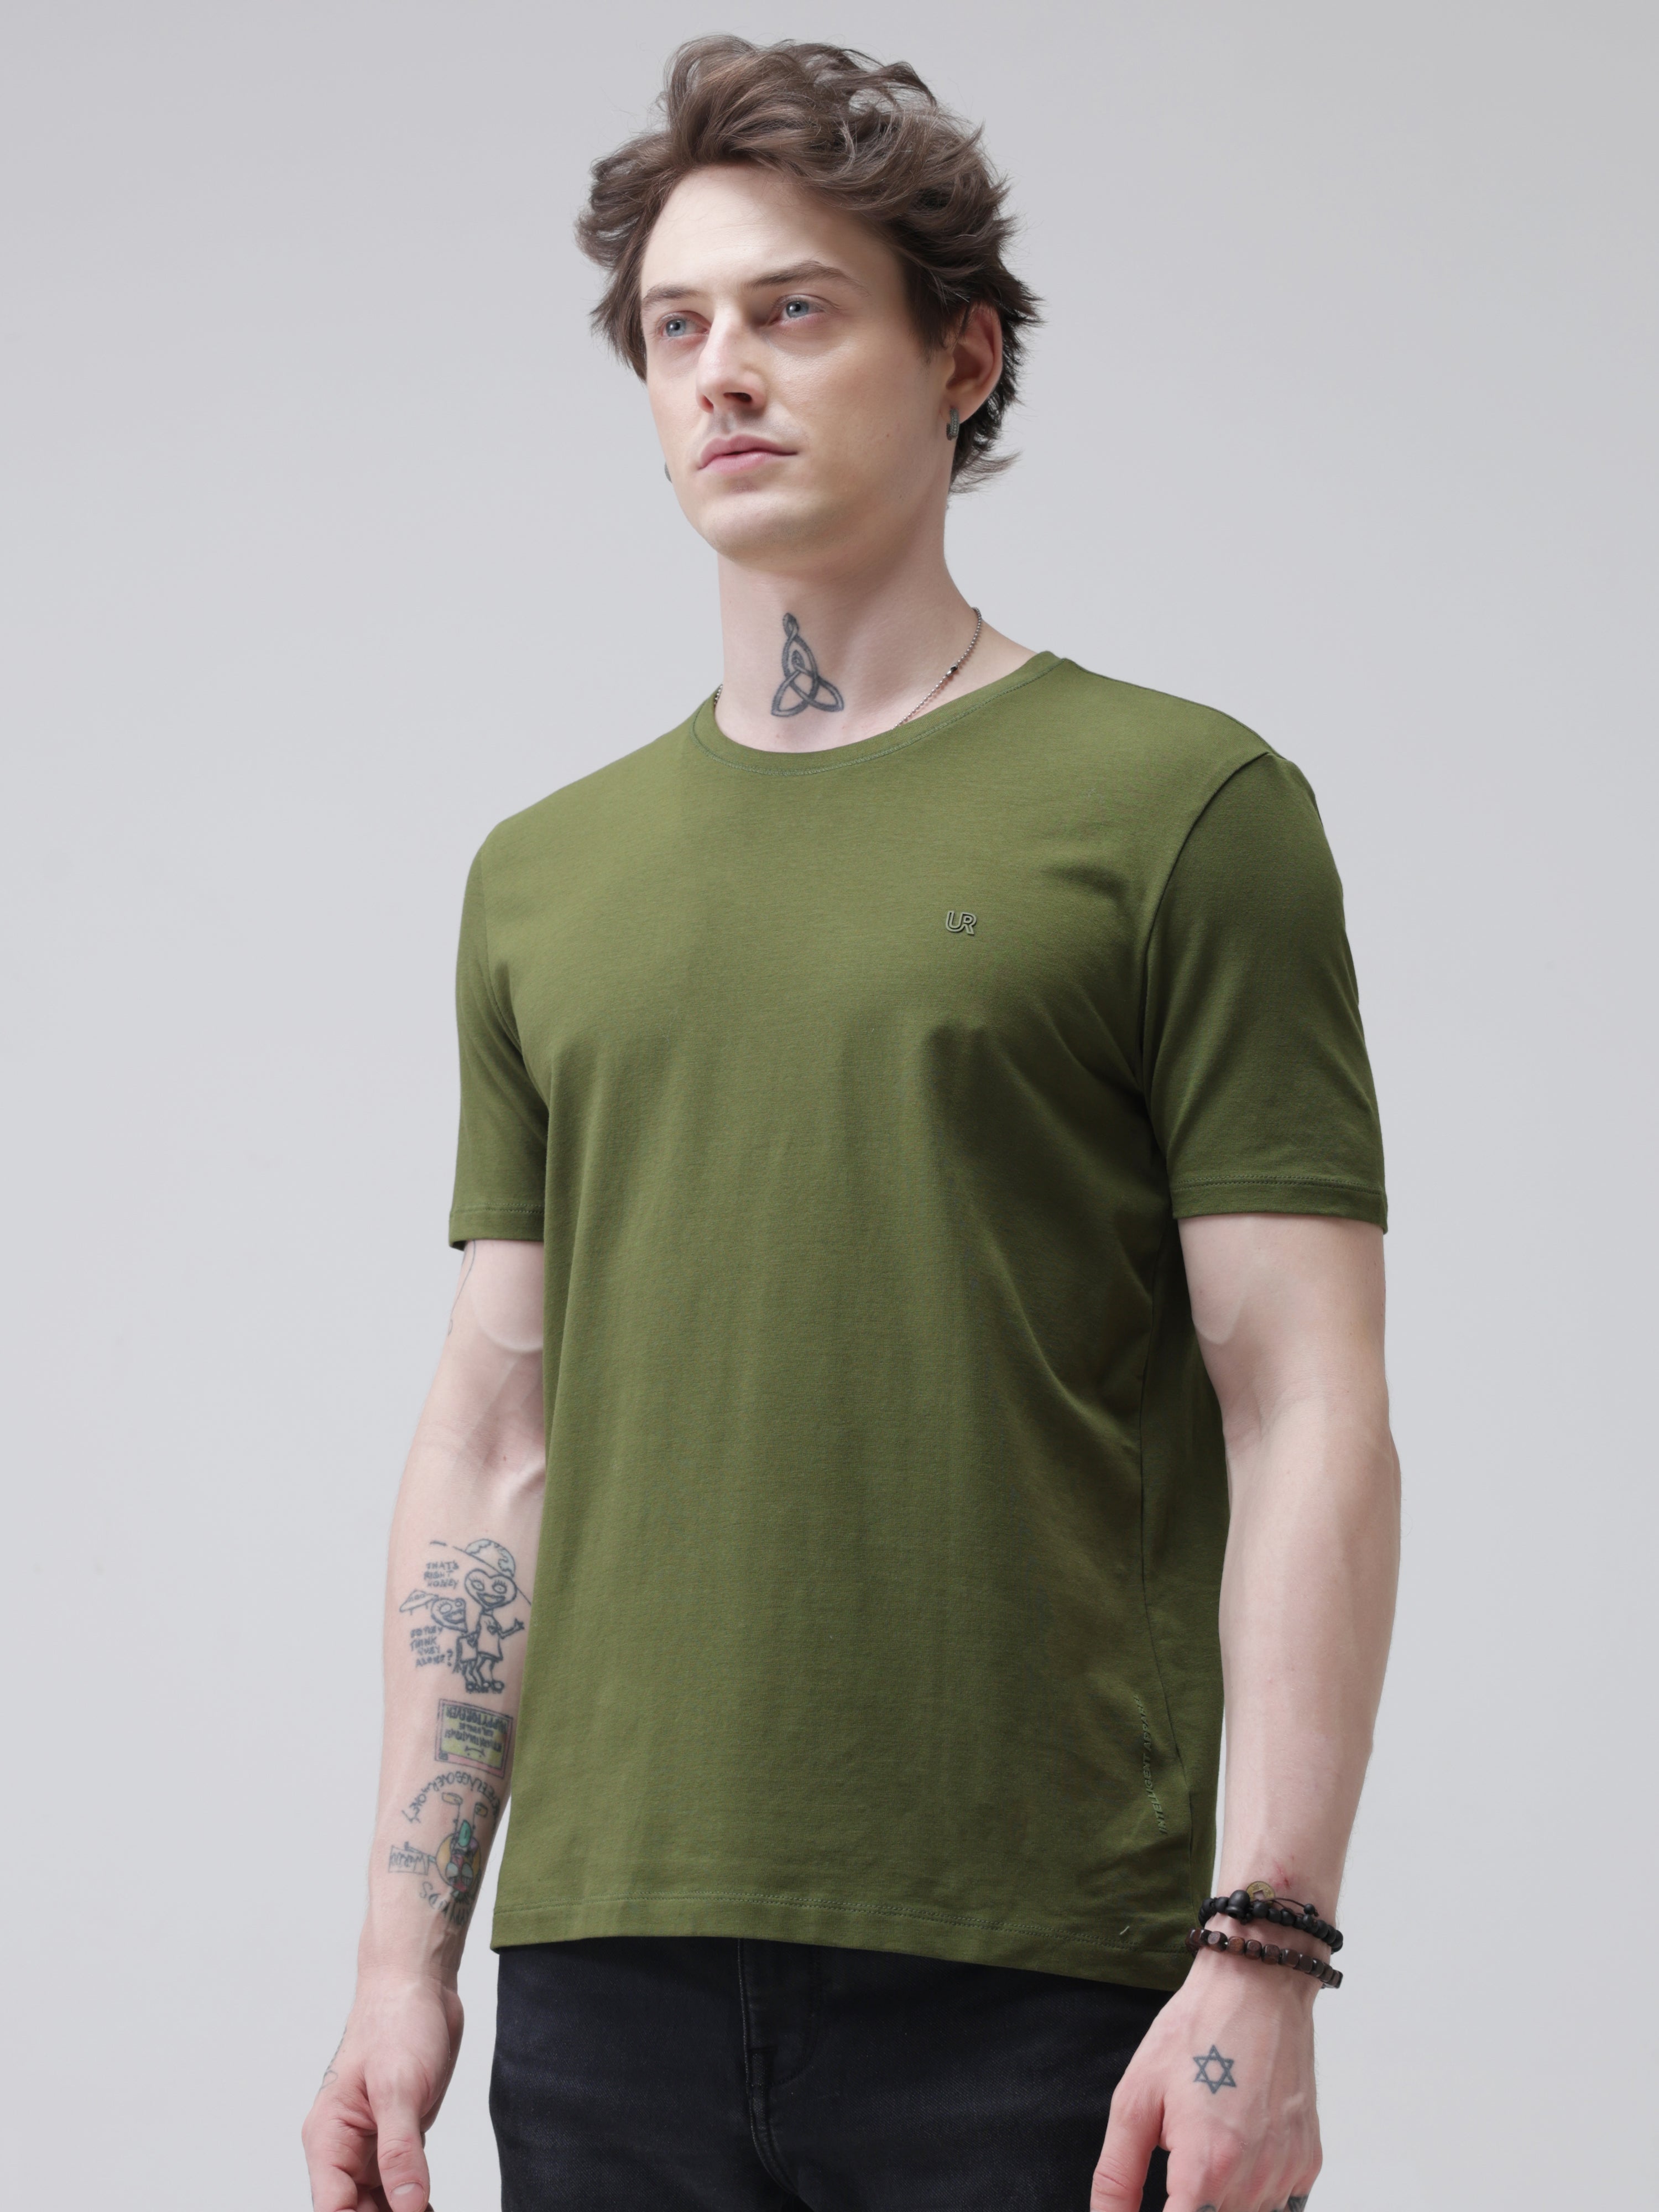 Man wearing a green round-neck Turms T-shirt, stain-proof, odor-resistant, best polo tshirt for men, menswear, premium cotton, water resistant.